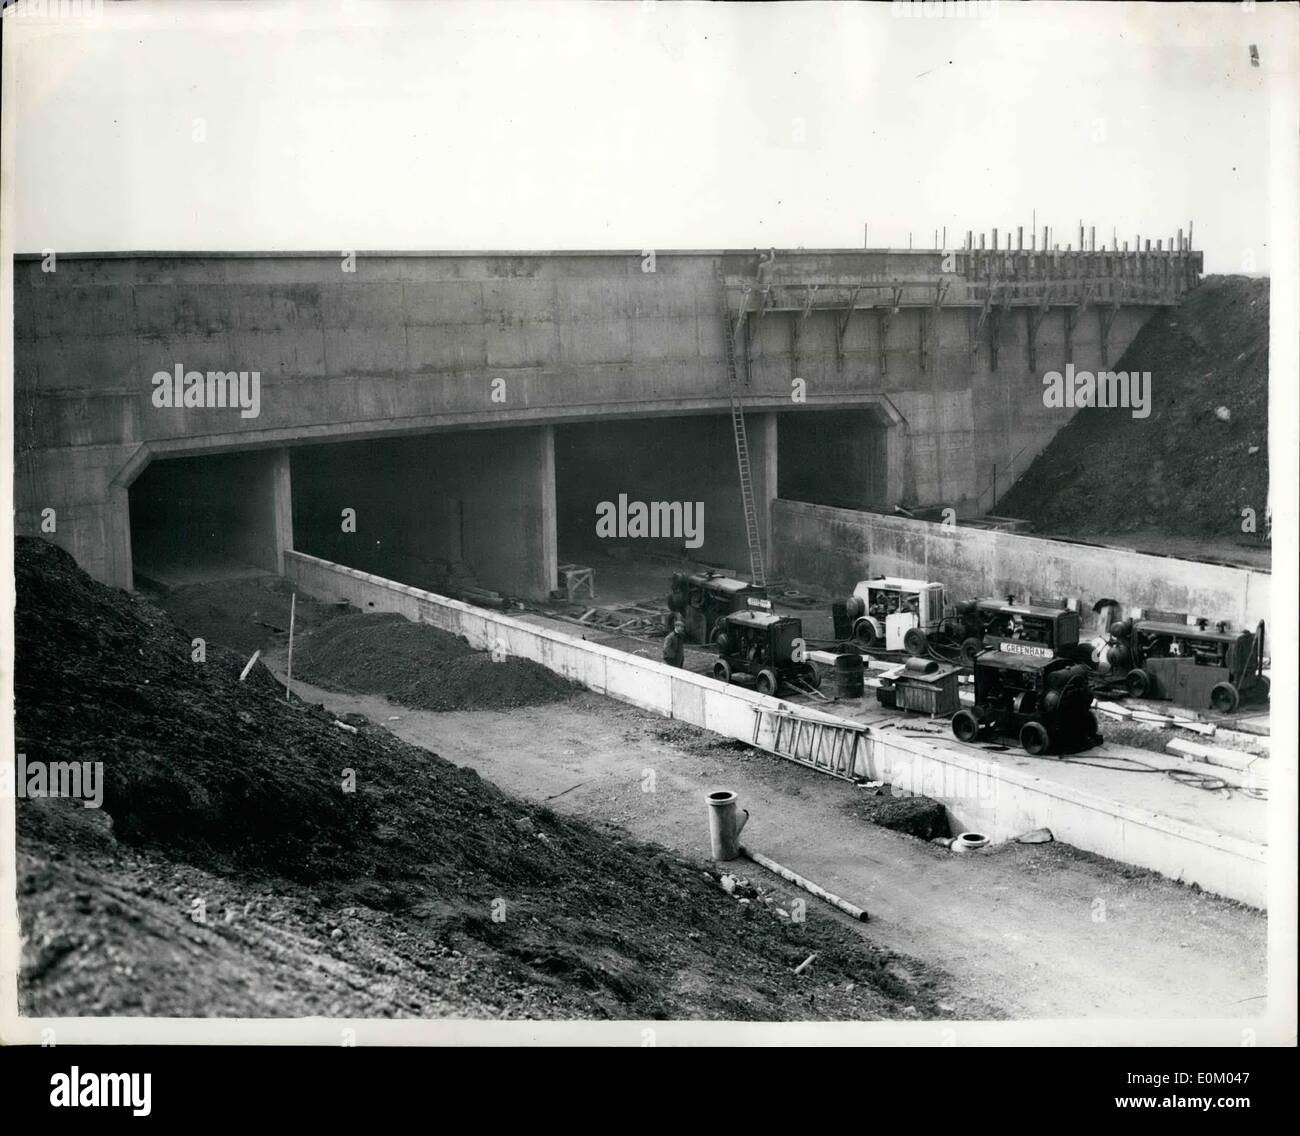 Feb. 02, 1953 - New Maintenance Base for London Airport: A new maintenance base provided for BOAG by the Ministry of Civil Aviation, is under construction at London Airport. Photo shows The southern end of the four-lane tunnel from the Bath Road to the central terminal area under construction. Stock Photo